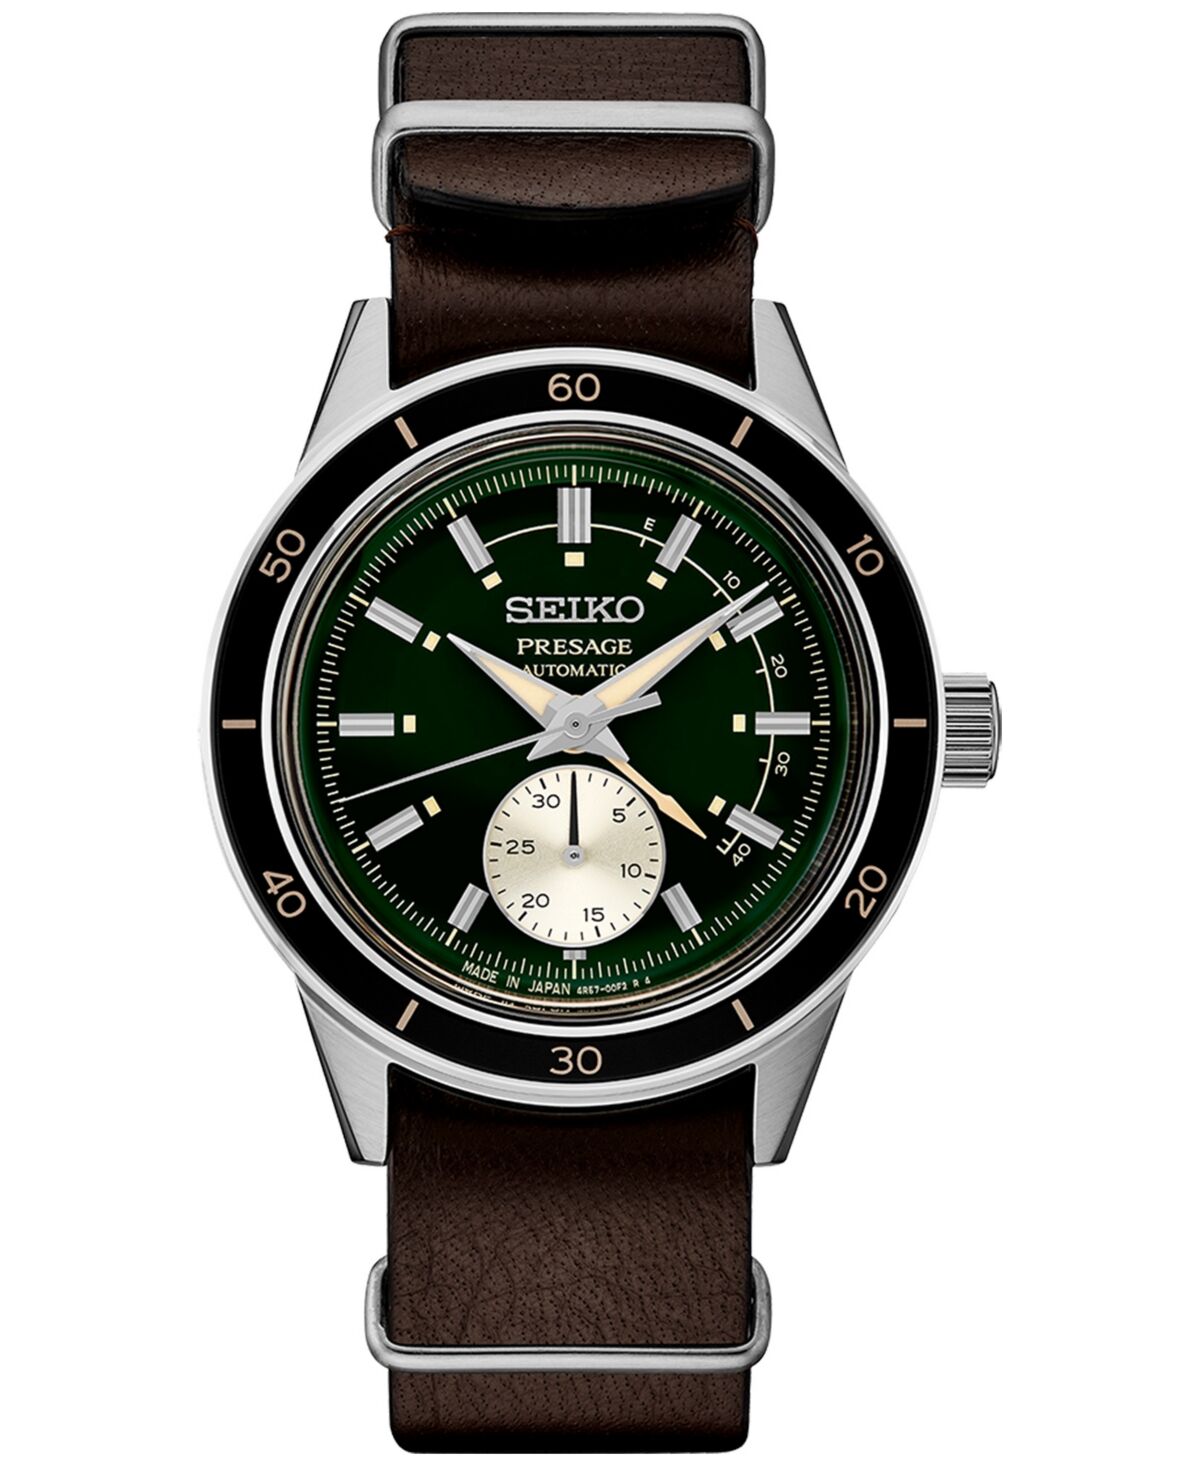 Seiko Men's Automatic Presage Brown Leather Strap Watch 41mm - Green